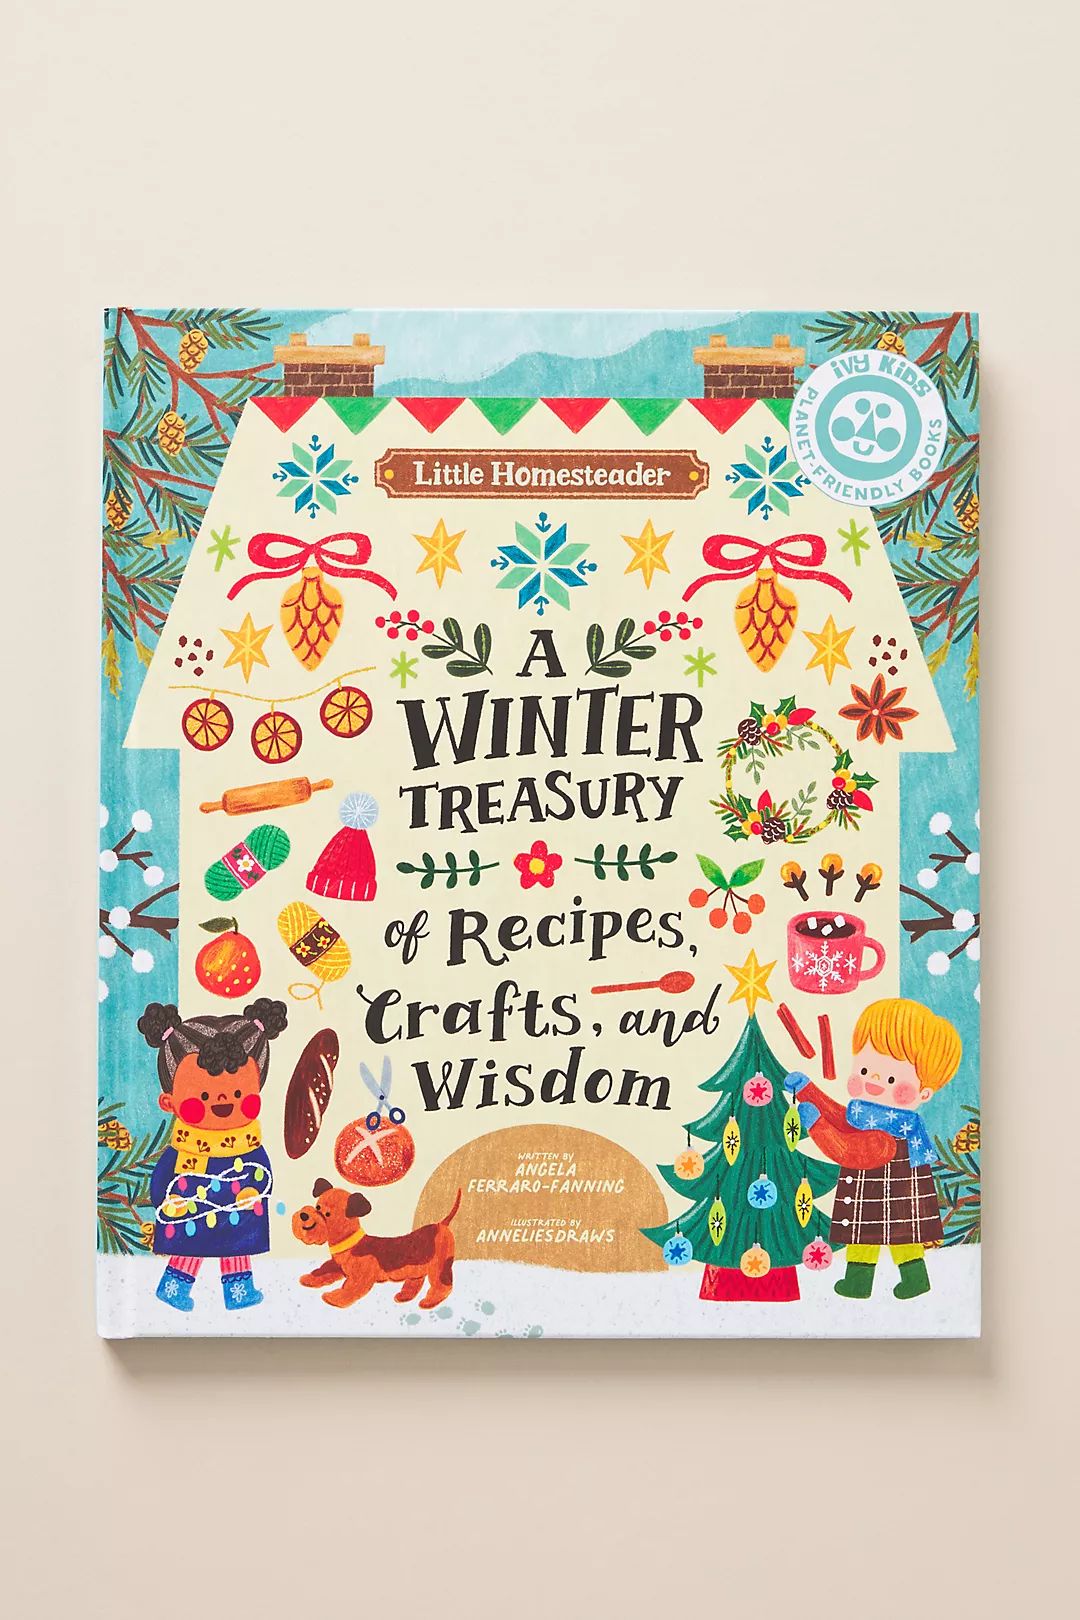 Little Homesteader: A Winter Treasury of Recipes, Crafts, and Wisdom | Anthropologie (US)